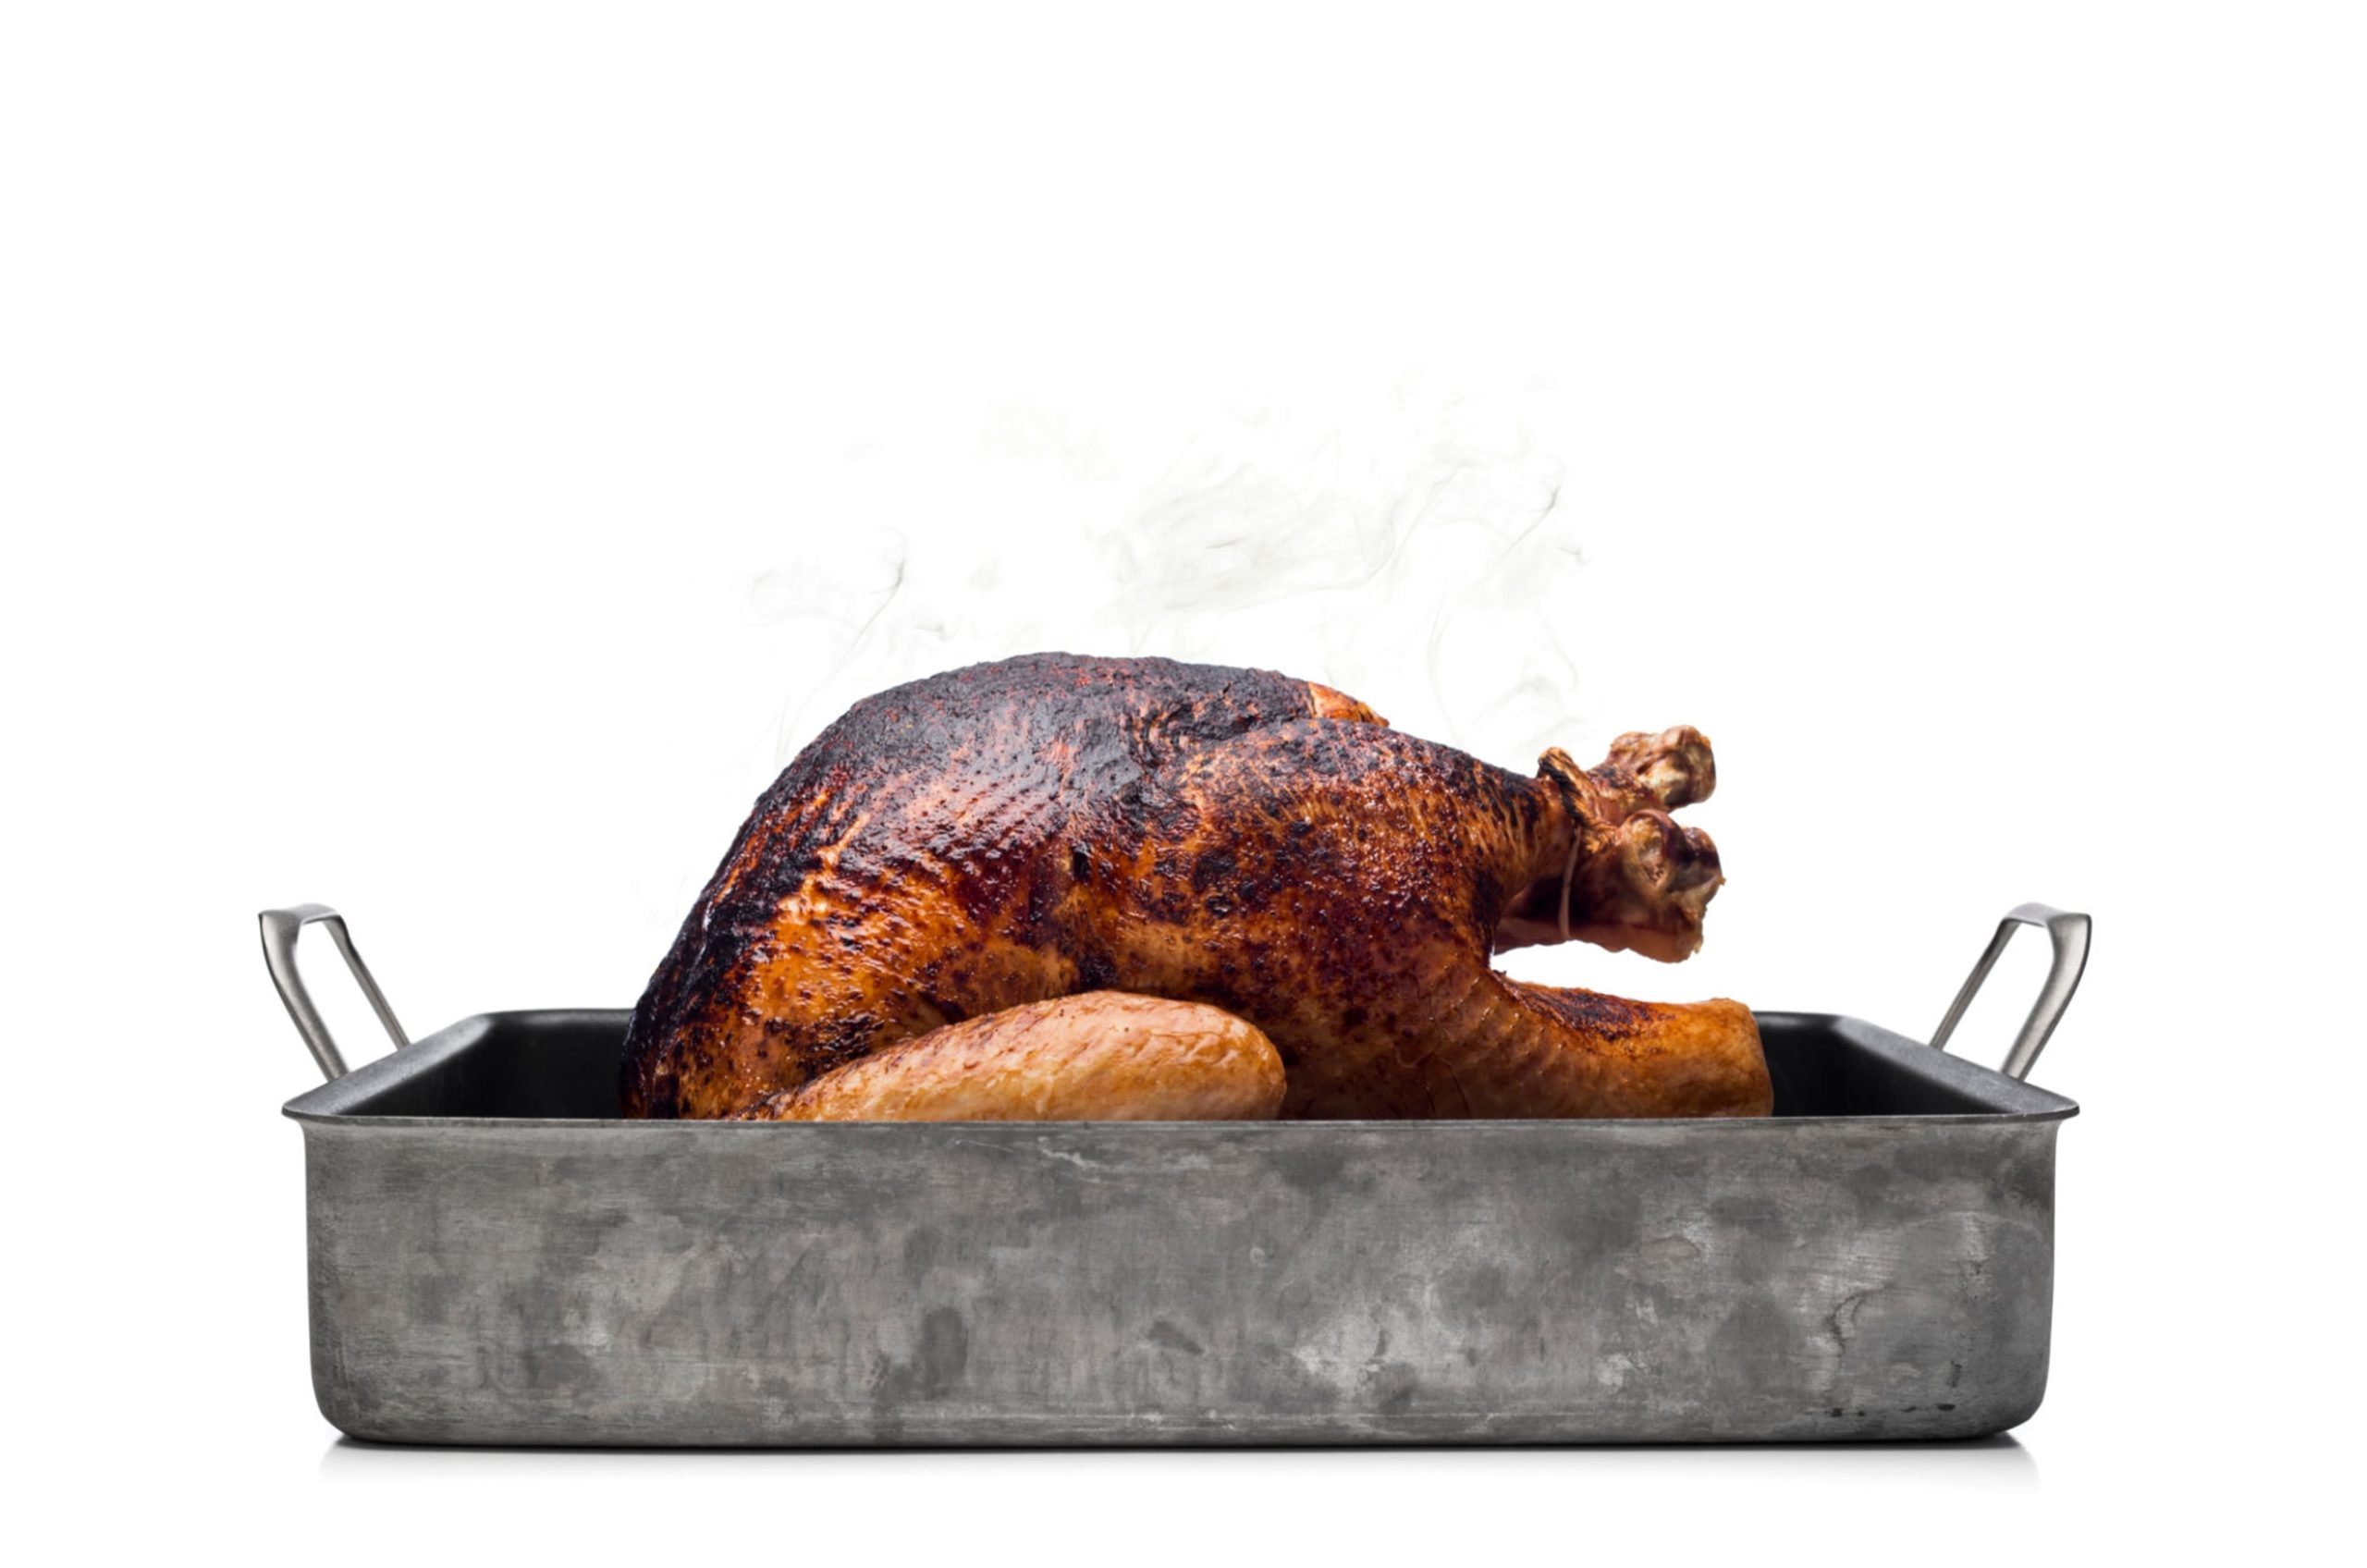 A burnt, smoldering and unseasoned looking Thanksgiving turkey in a roasting pan.